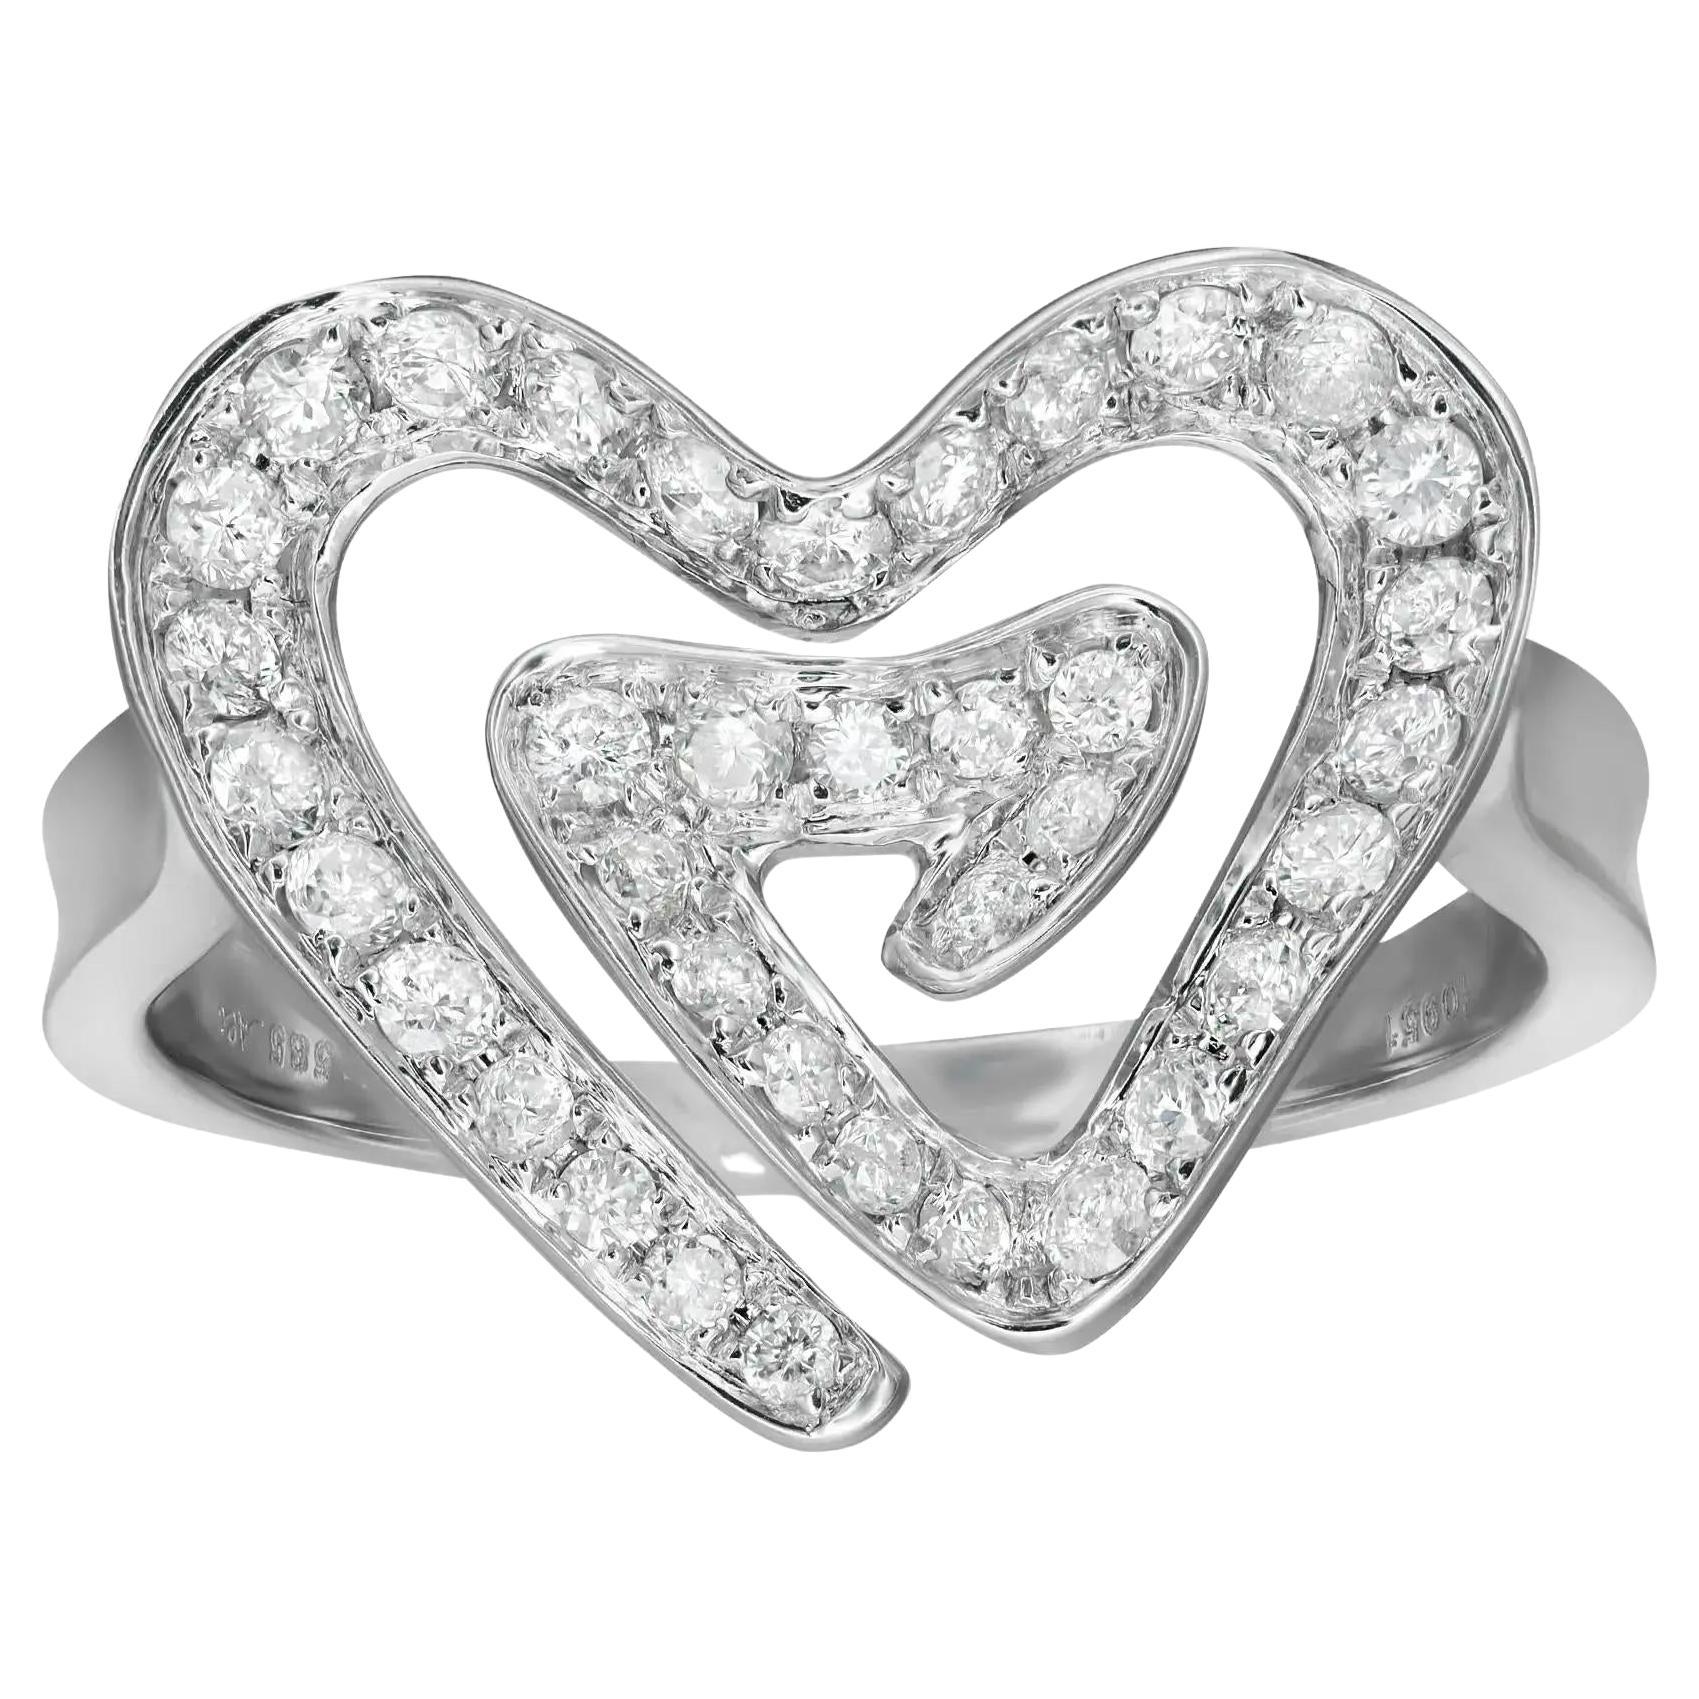 0.61Cttw Pave Set Round Cut Diamond Heart Cocktail Ring 14K White Gold Size 8 For Sale